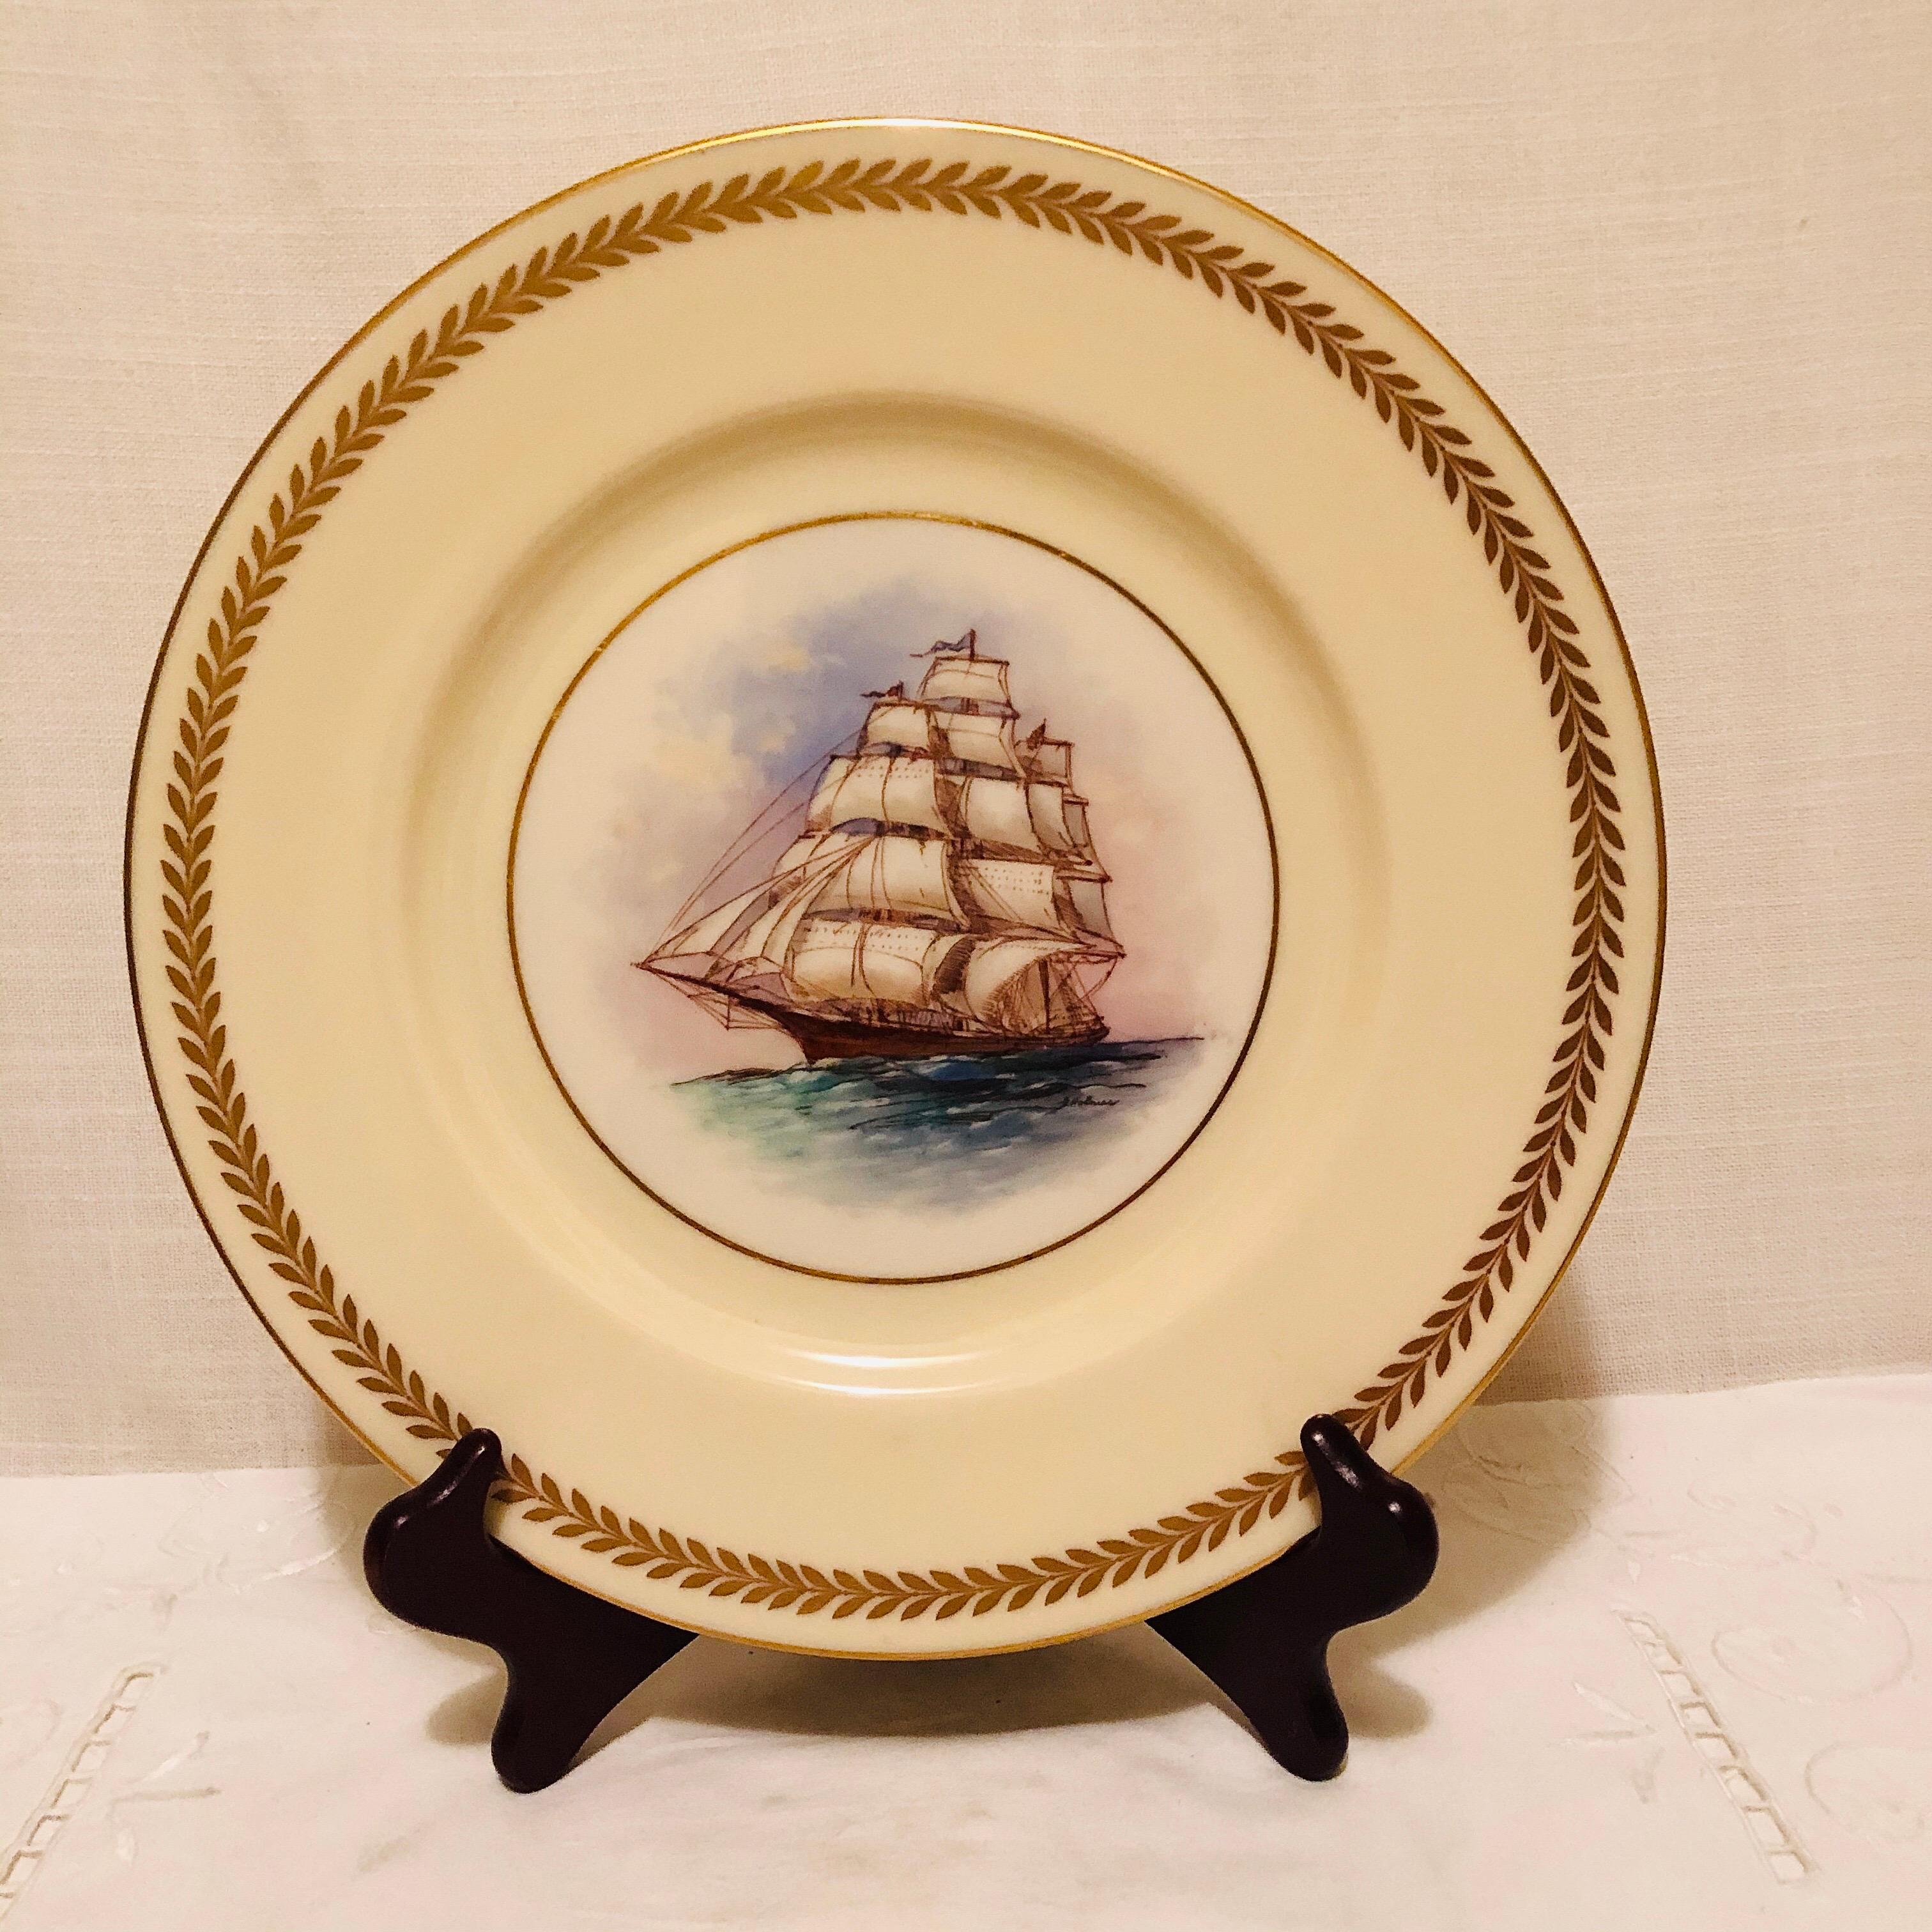 Other Set of Twelve Lenox Plates Each Hand Painted with a Different Tall Ship